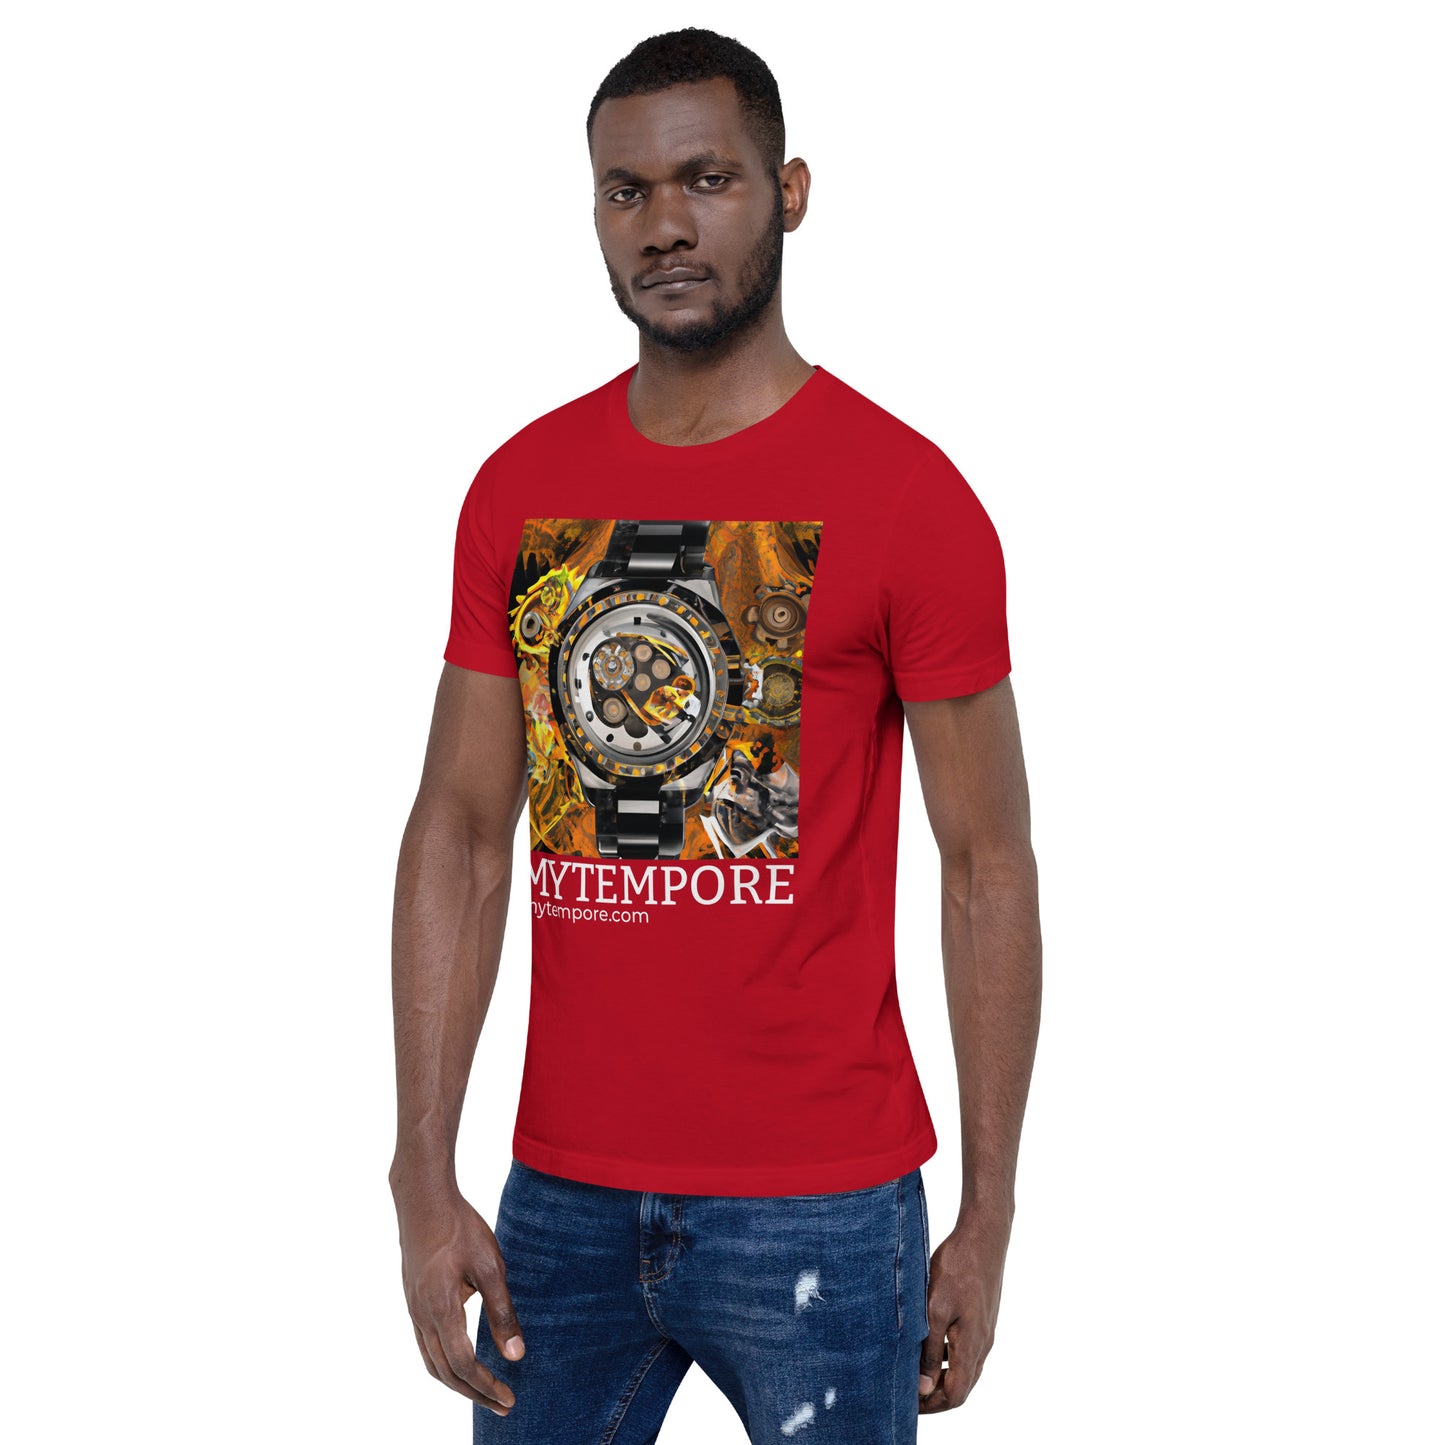 "MYTEMPORE" WATCH WITH GEARS Unisex t-shirt